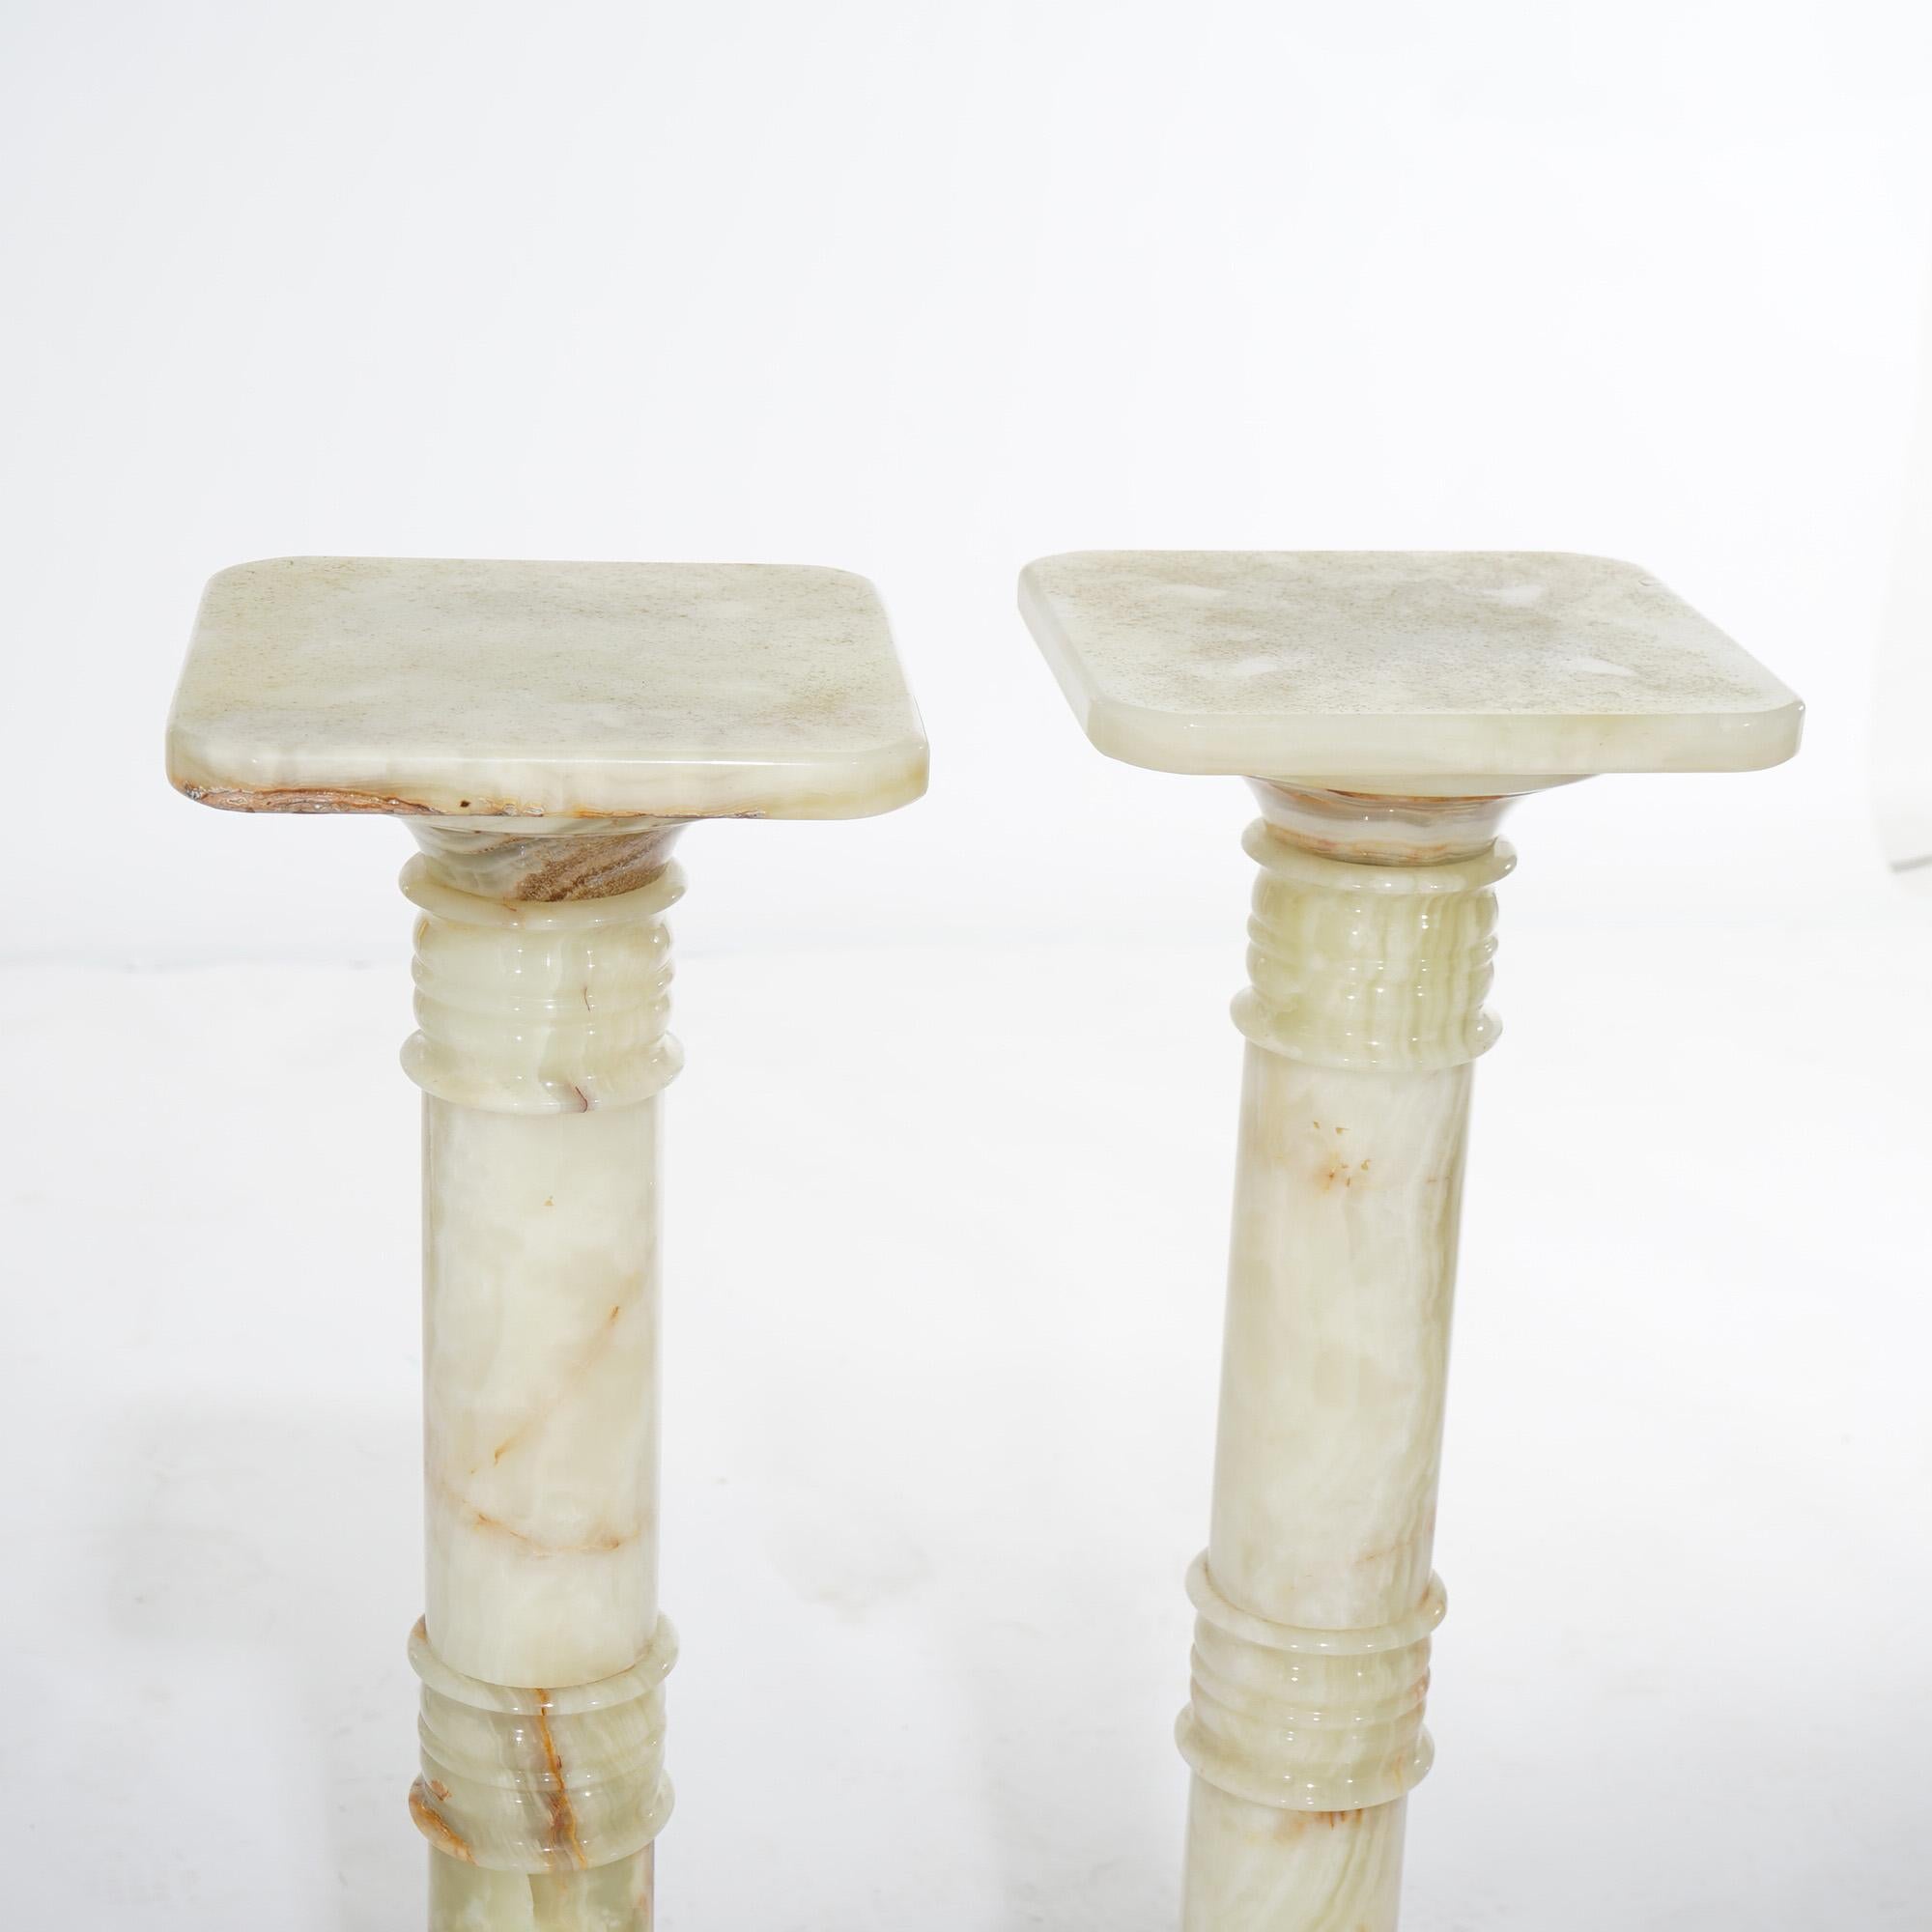 20th Century Antique Pair of Classical Carved Onyx Sculpture Display Pedestals Early 20th C For Sale